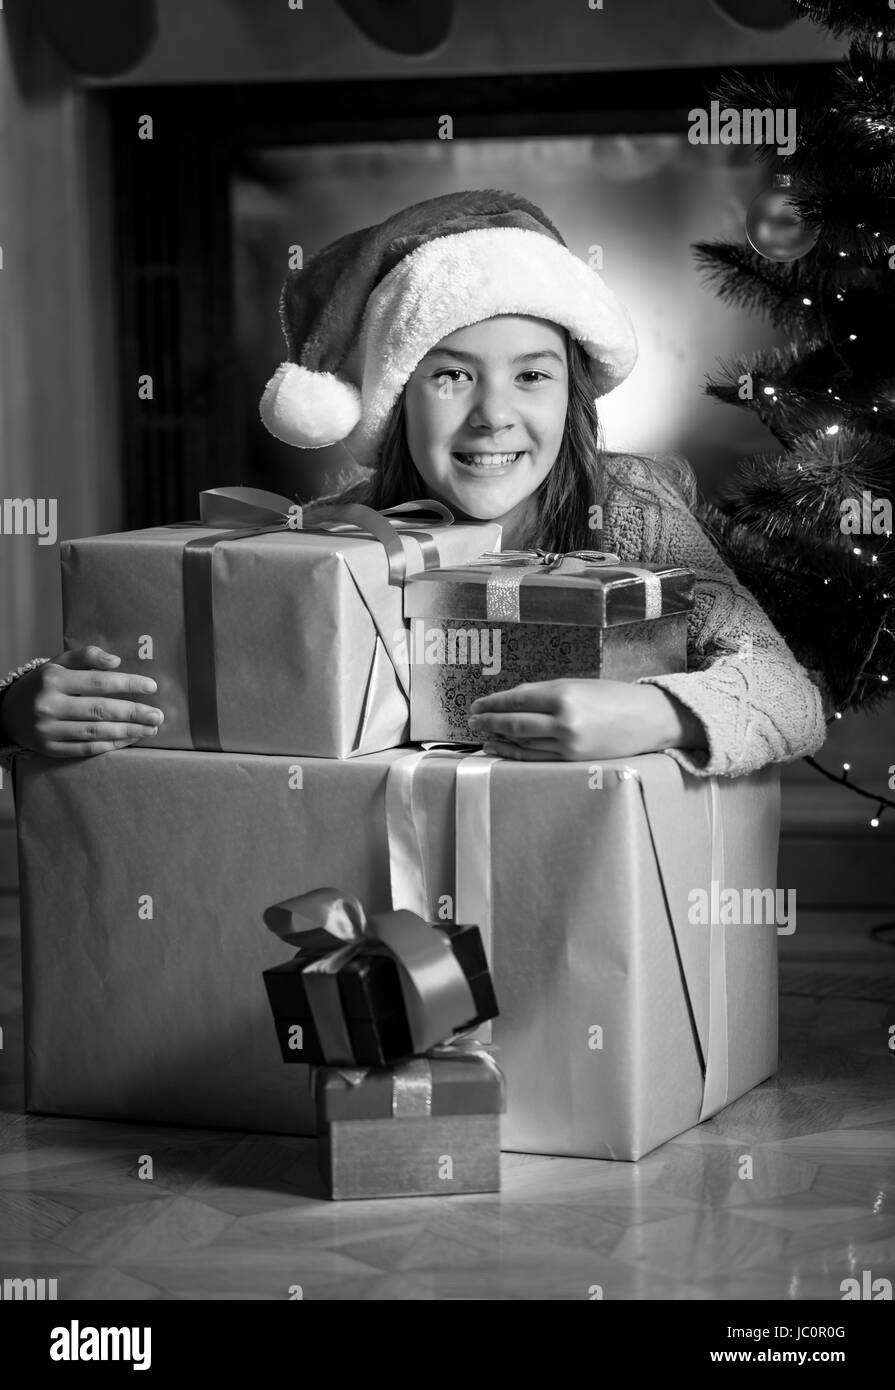 Black and white portrait of cute smiling girl posing with Christmas gift boxes Stock Photo